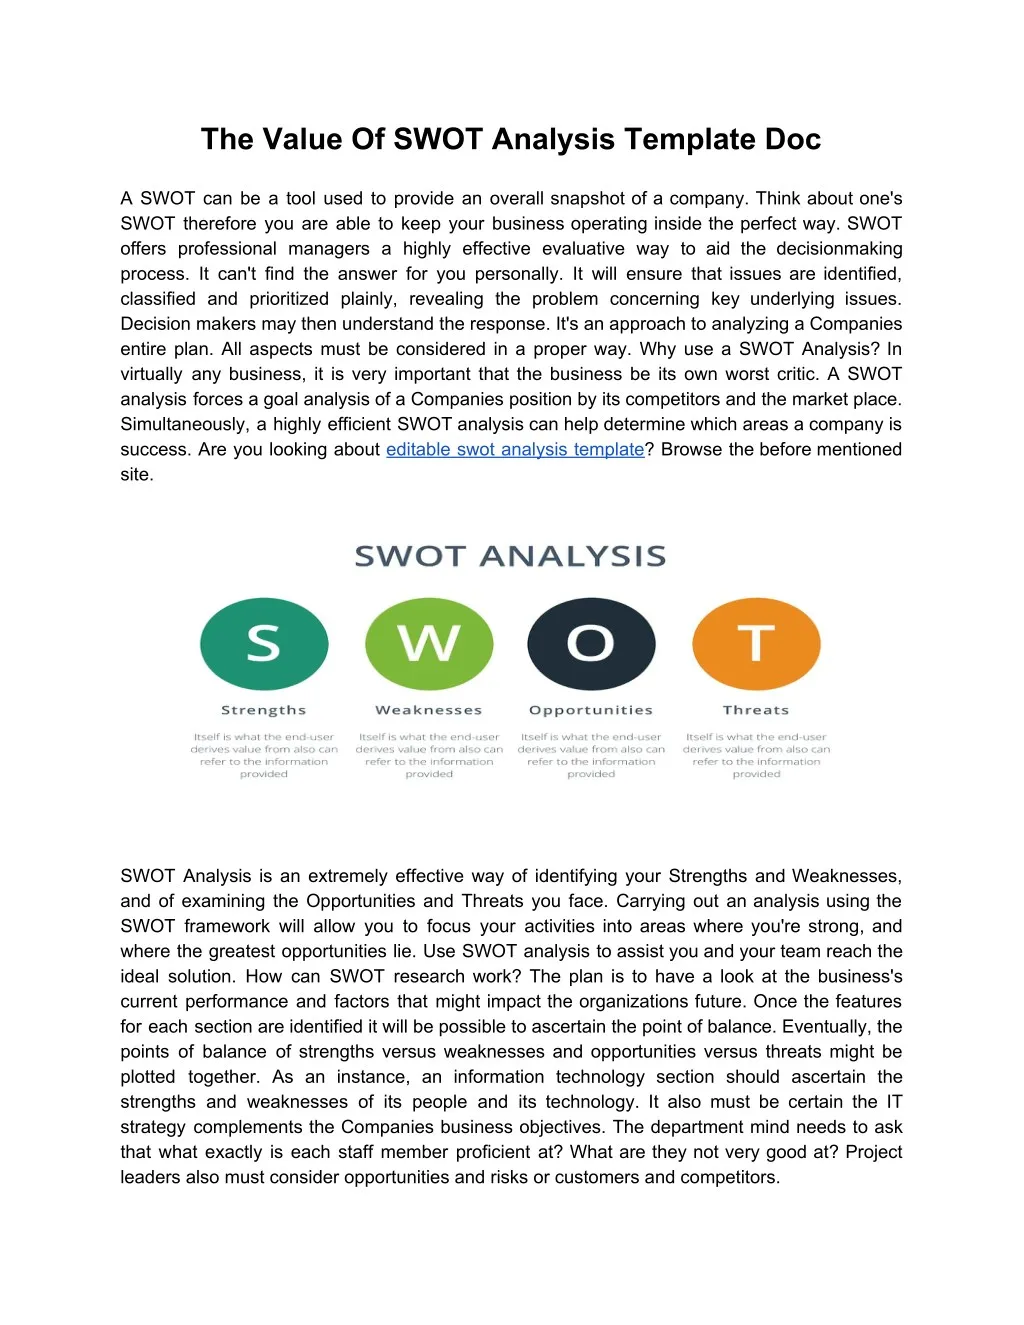 the value of swot analysis template doc